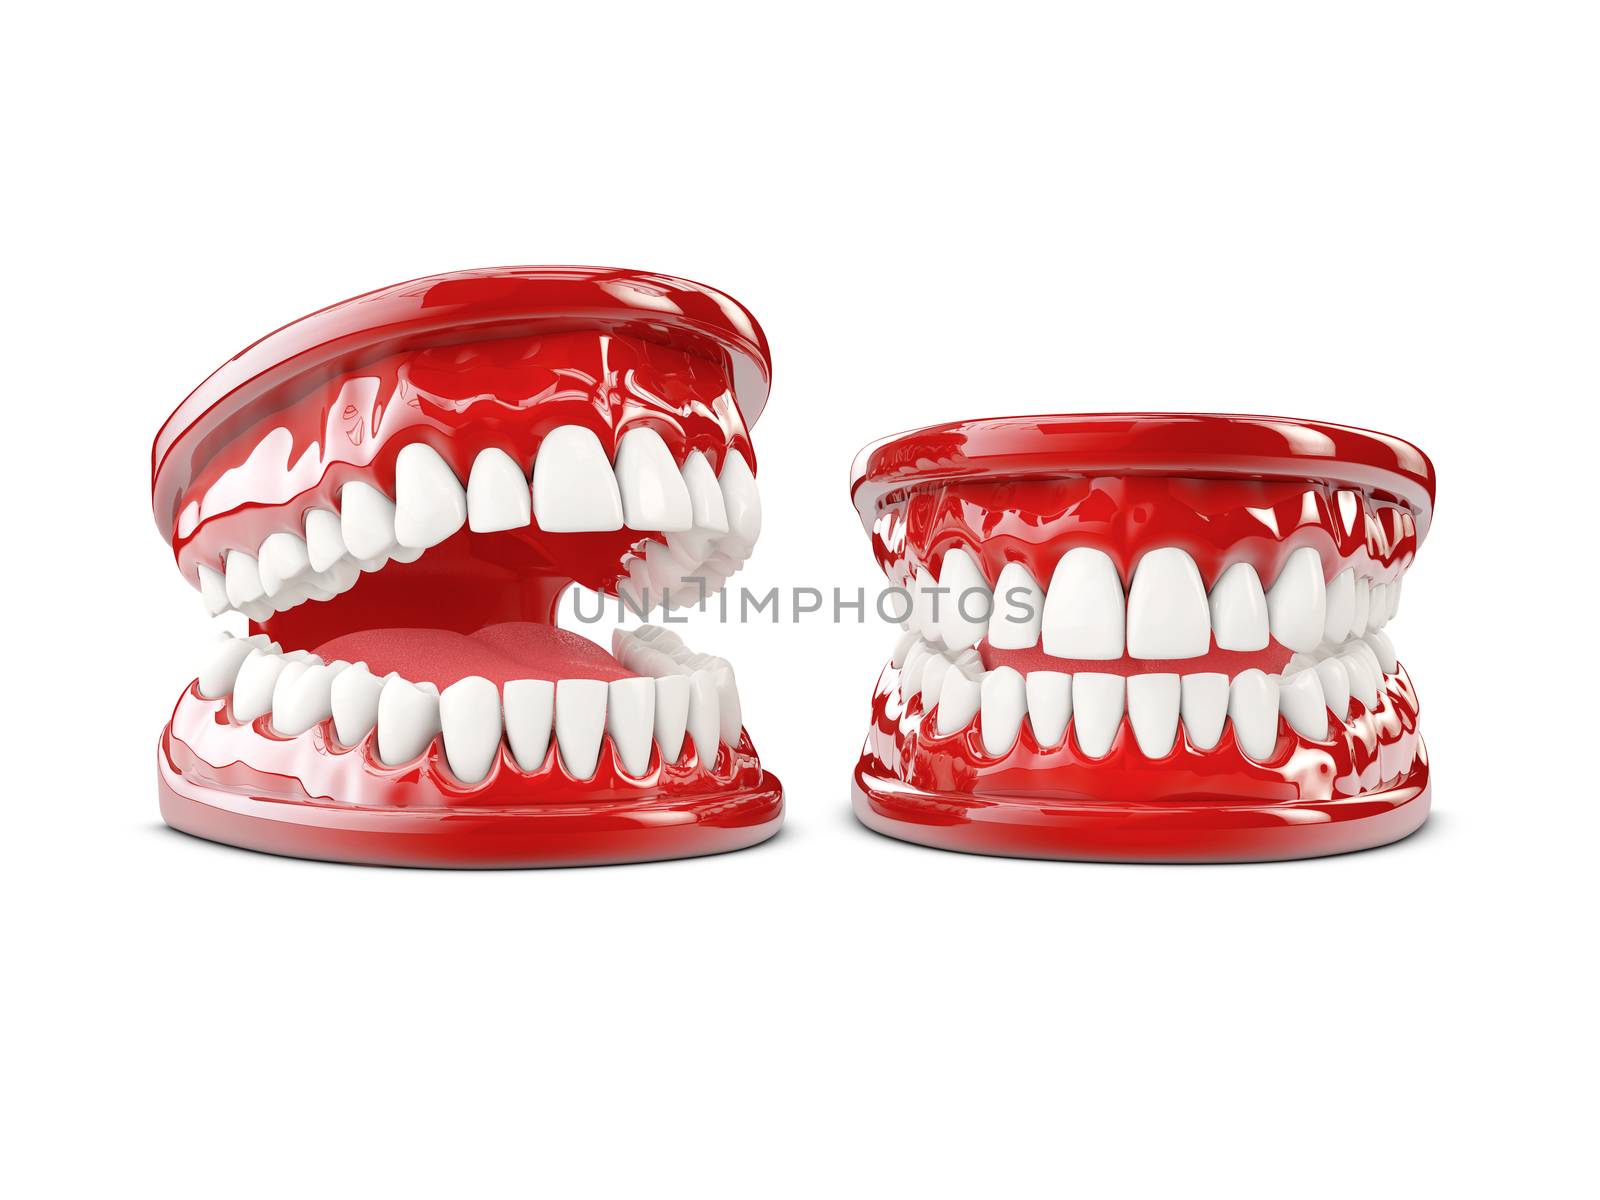 3d Illustration of human teeth, open and close mouth on white background.